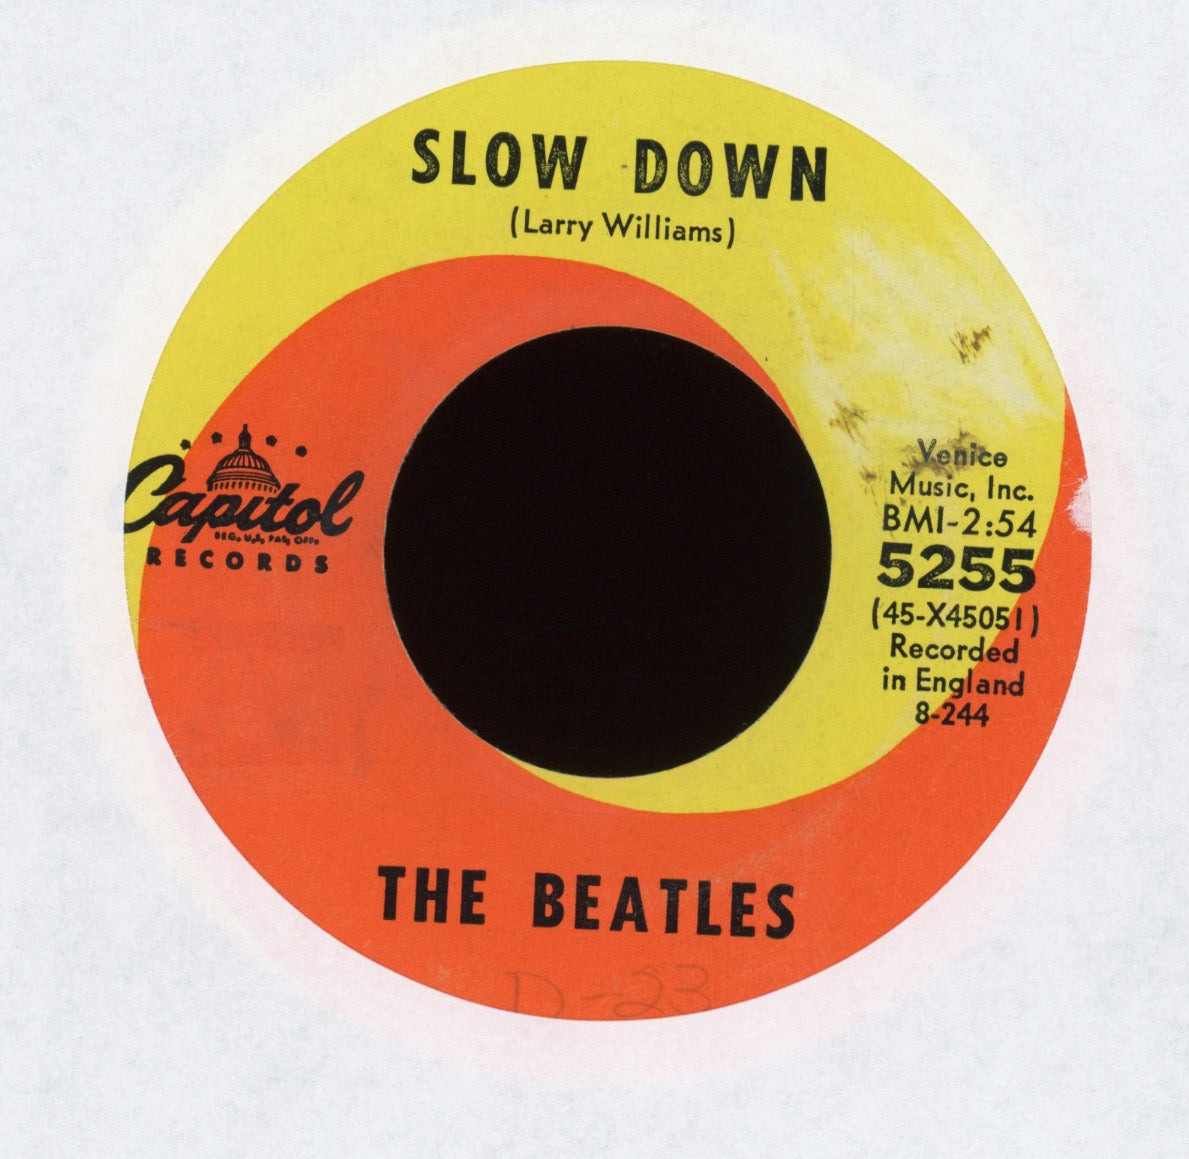 The Beatles - Matchbox / Slow Down on Capitol 45 With Picture Sleeve